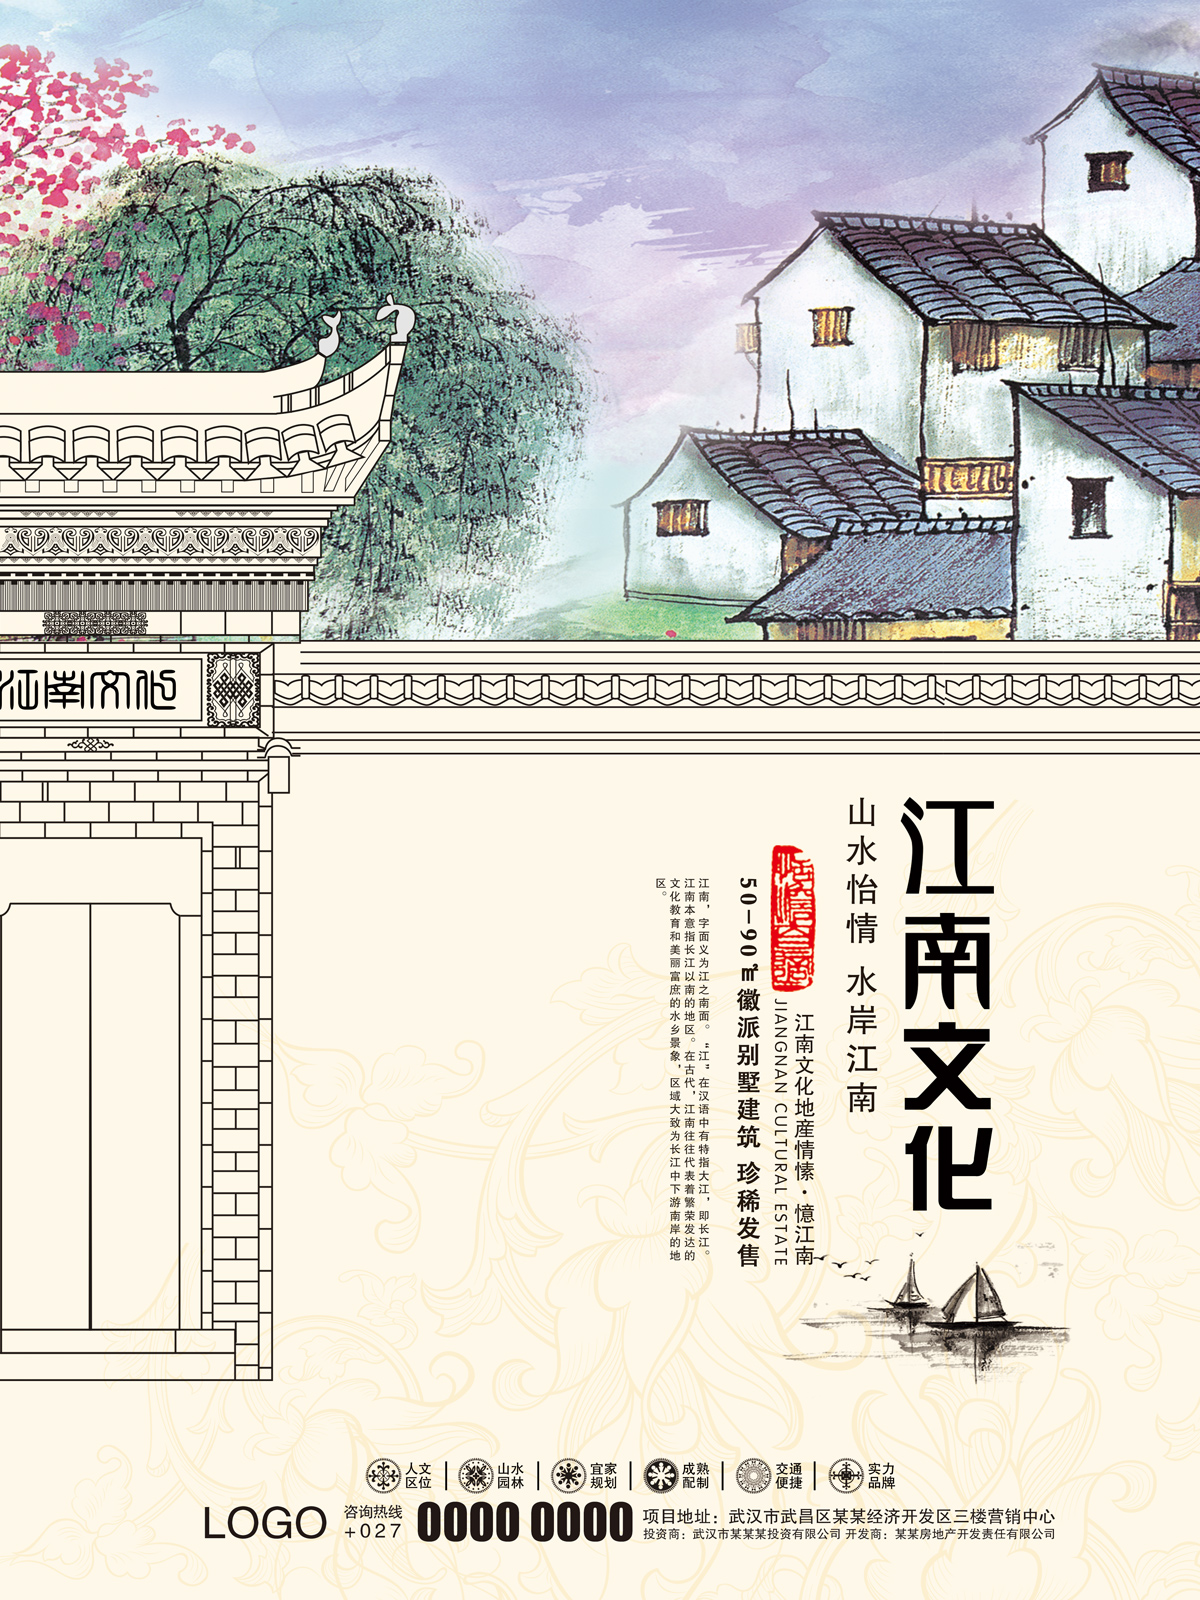 Jiangnan cultural real estate poster PSD material is free to download